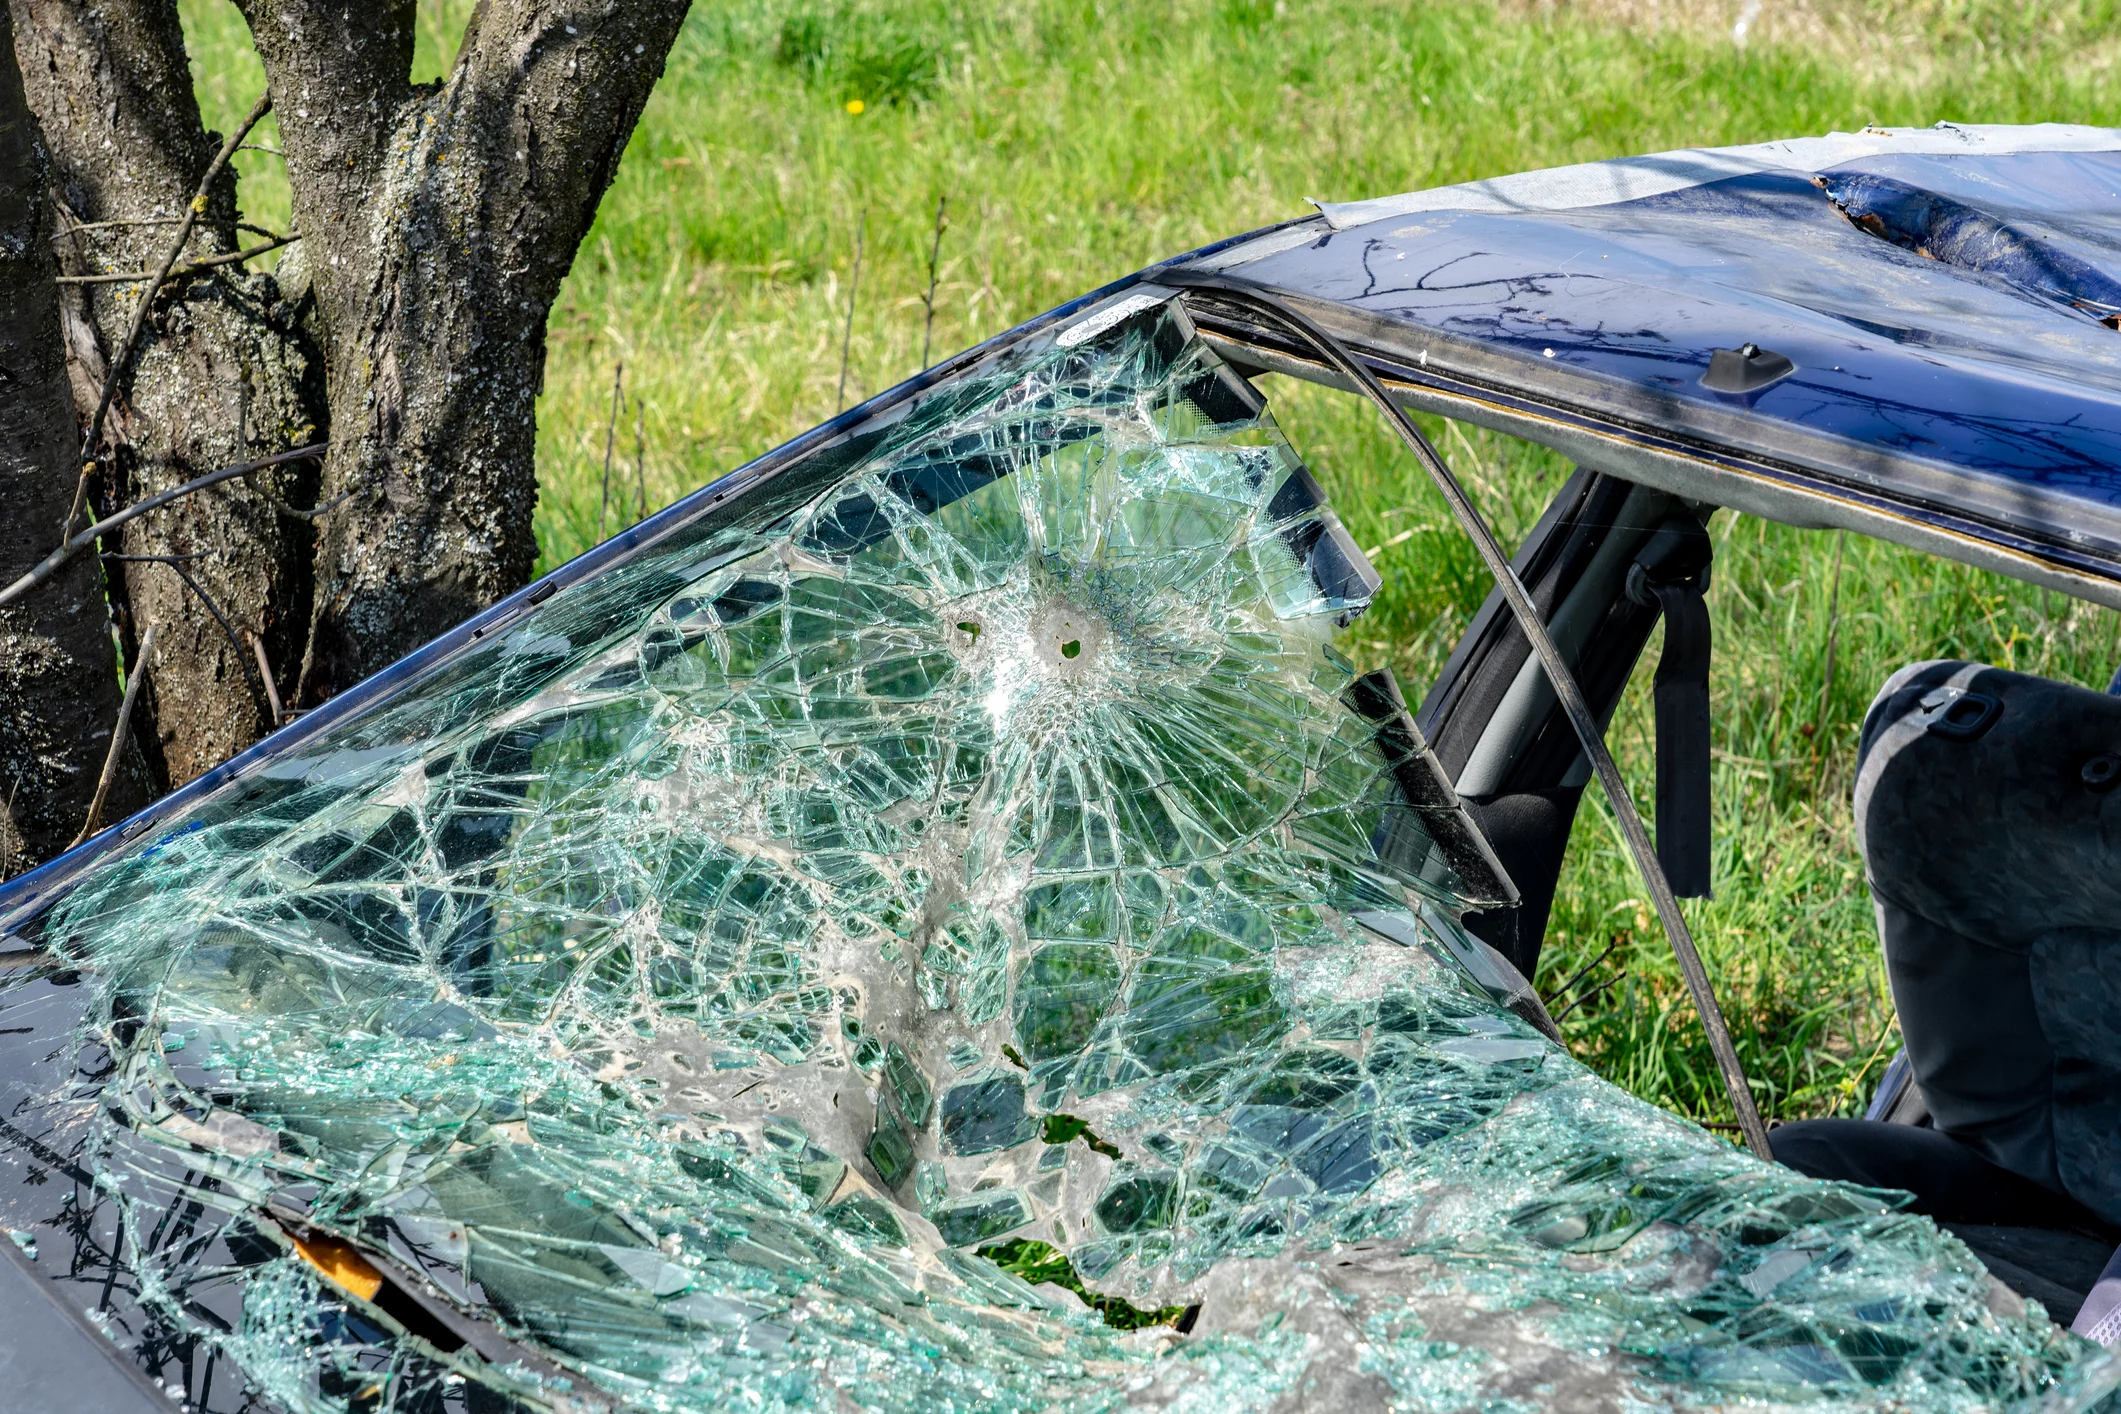 Attorney and Partner Catie Meehan of the Steinberg Law Firm recently settled a case for a client who was severely injured in a car crash in her own vehicle, but which was being driven by someone else.